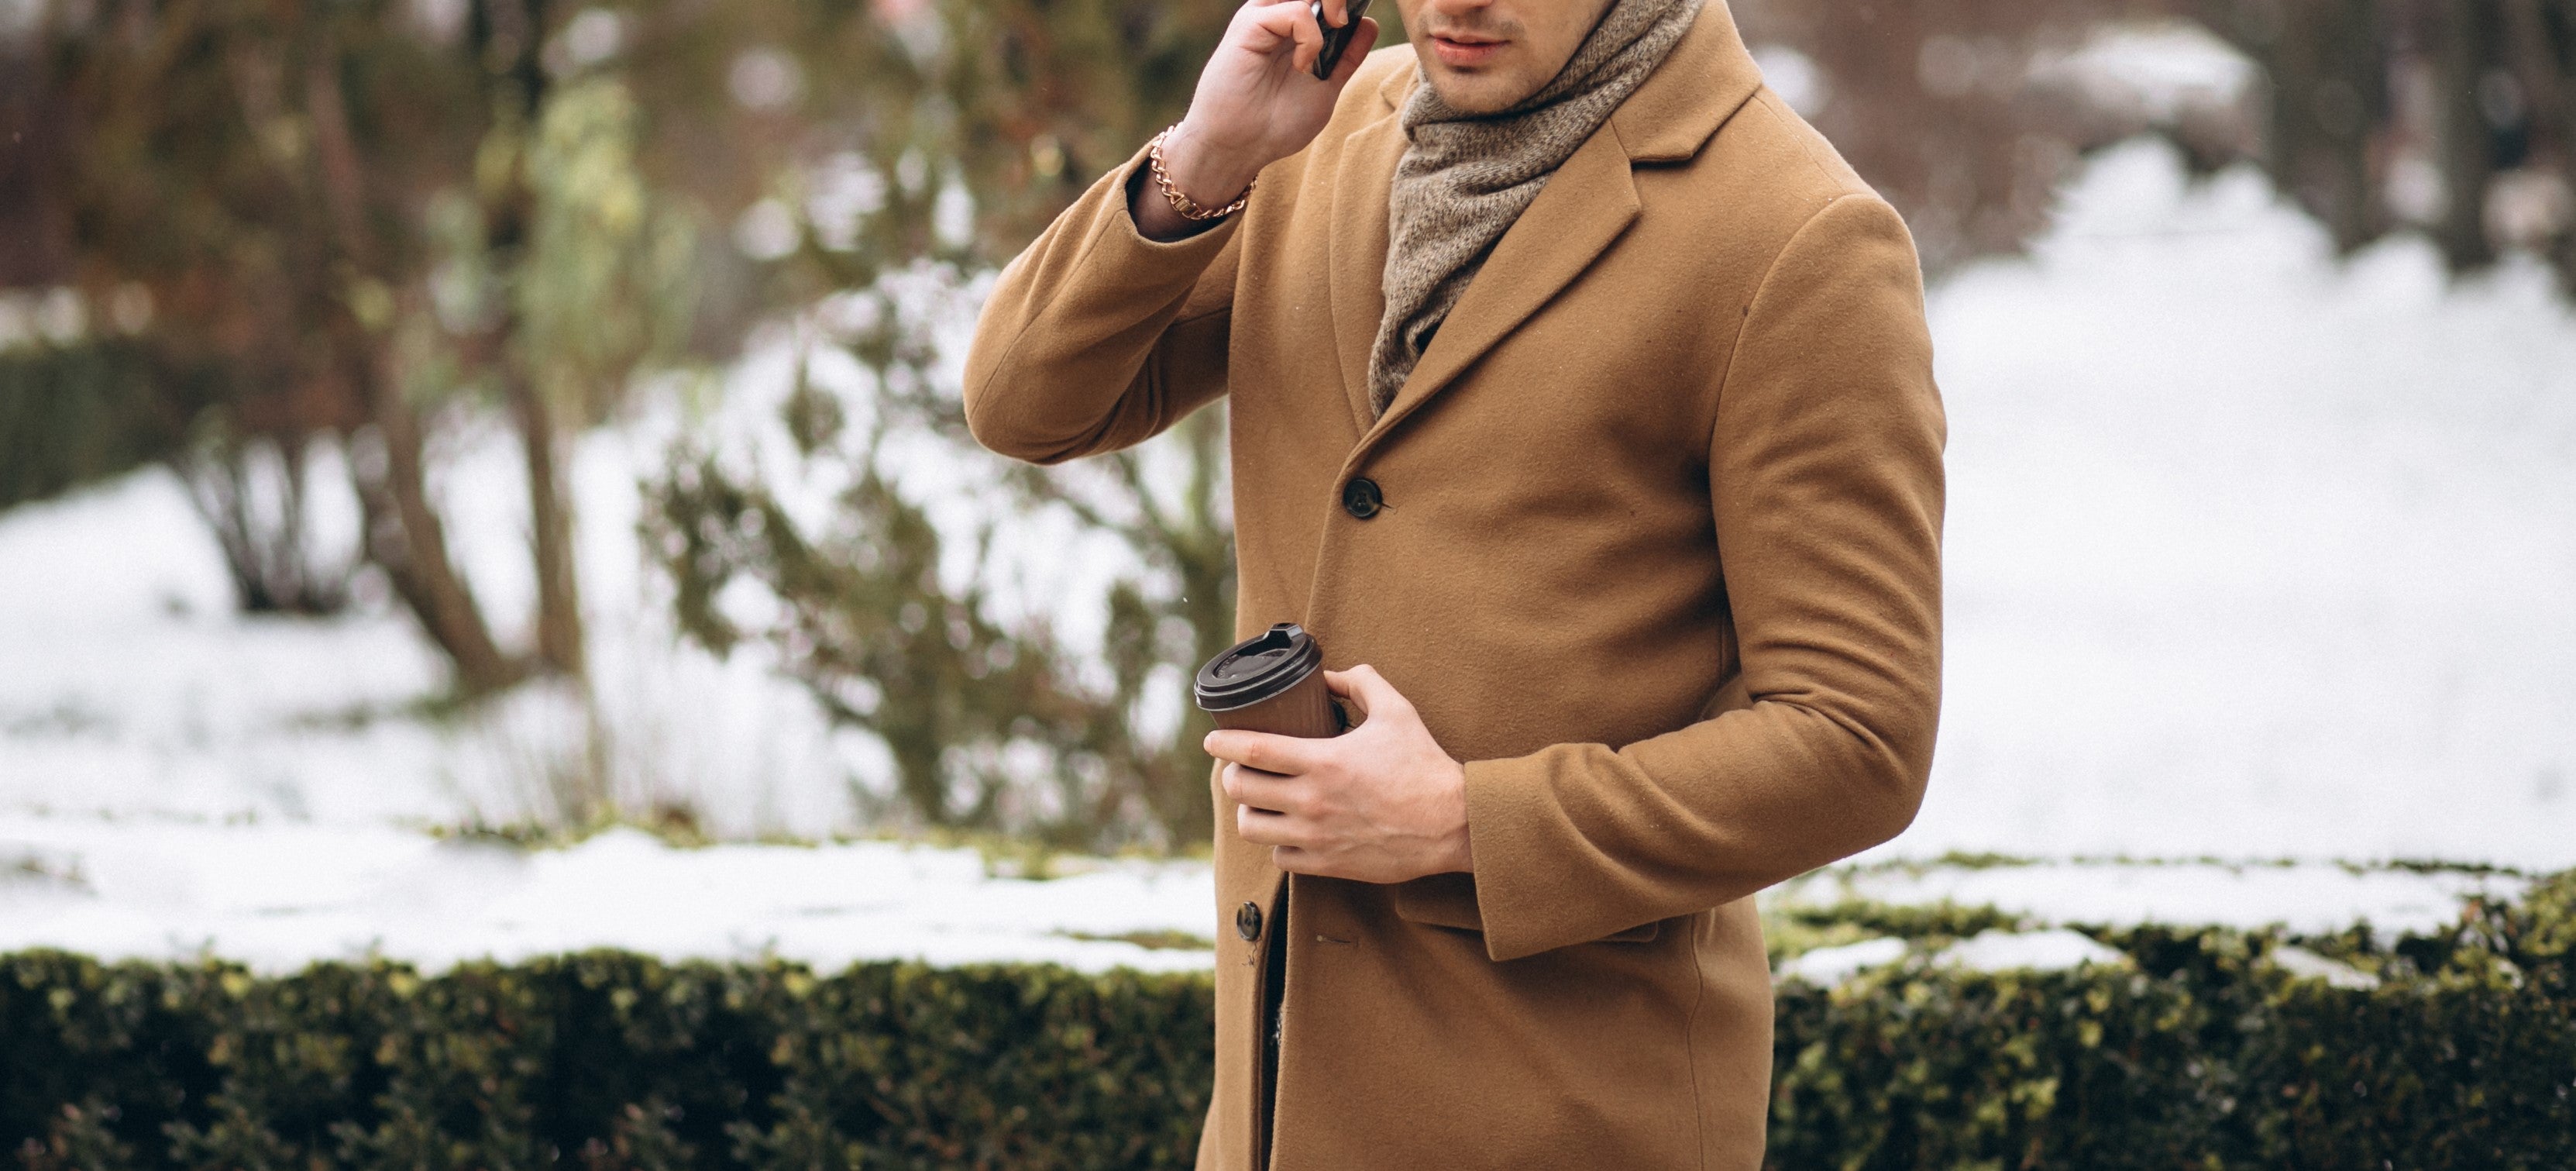 Dressing with Style for Winter